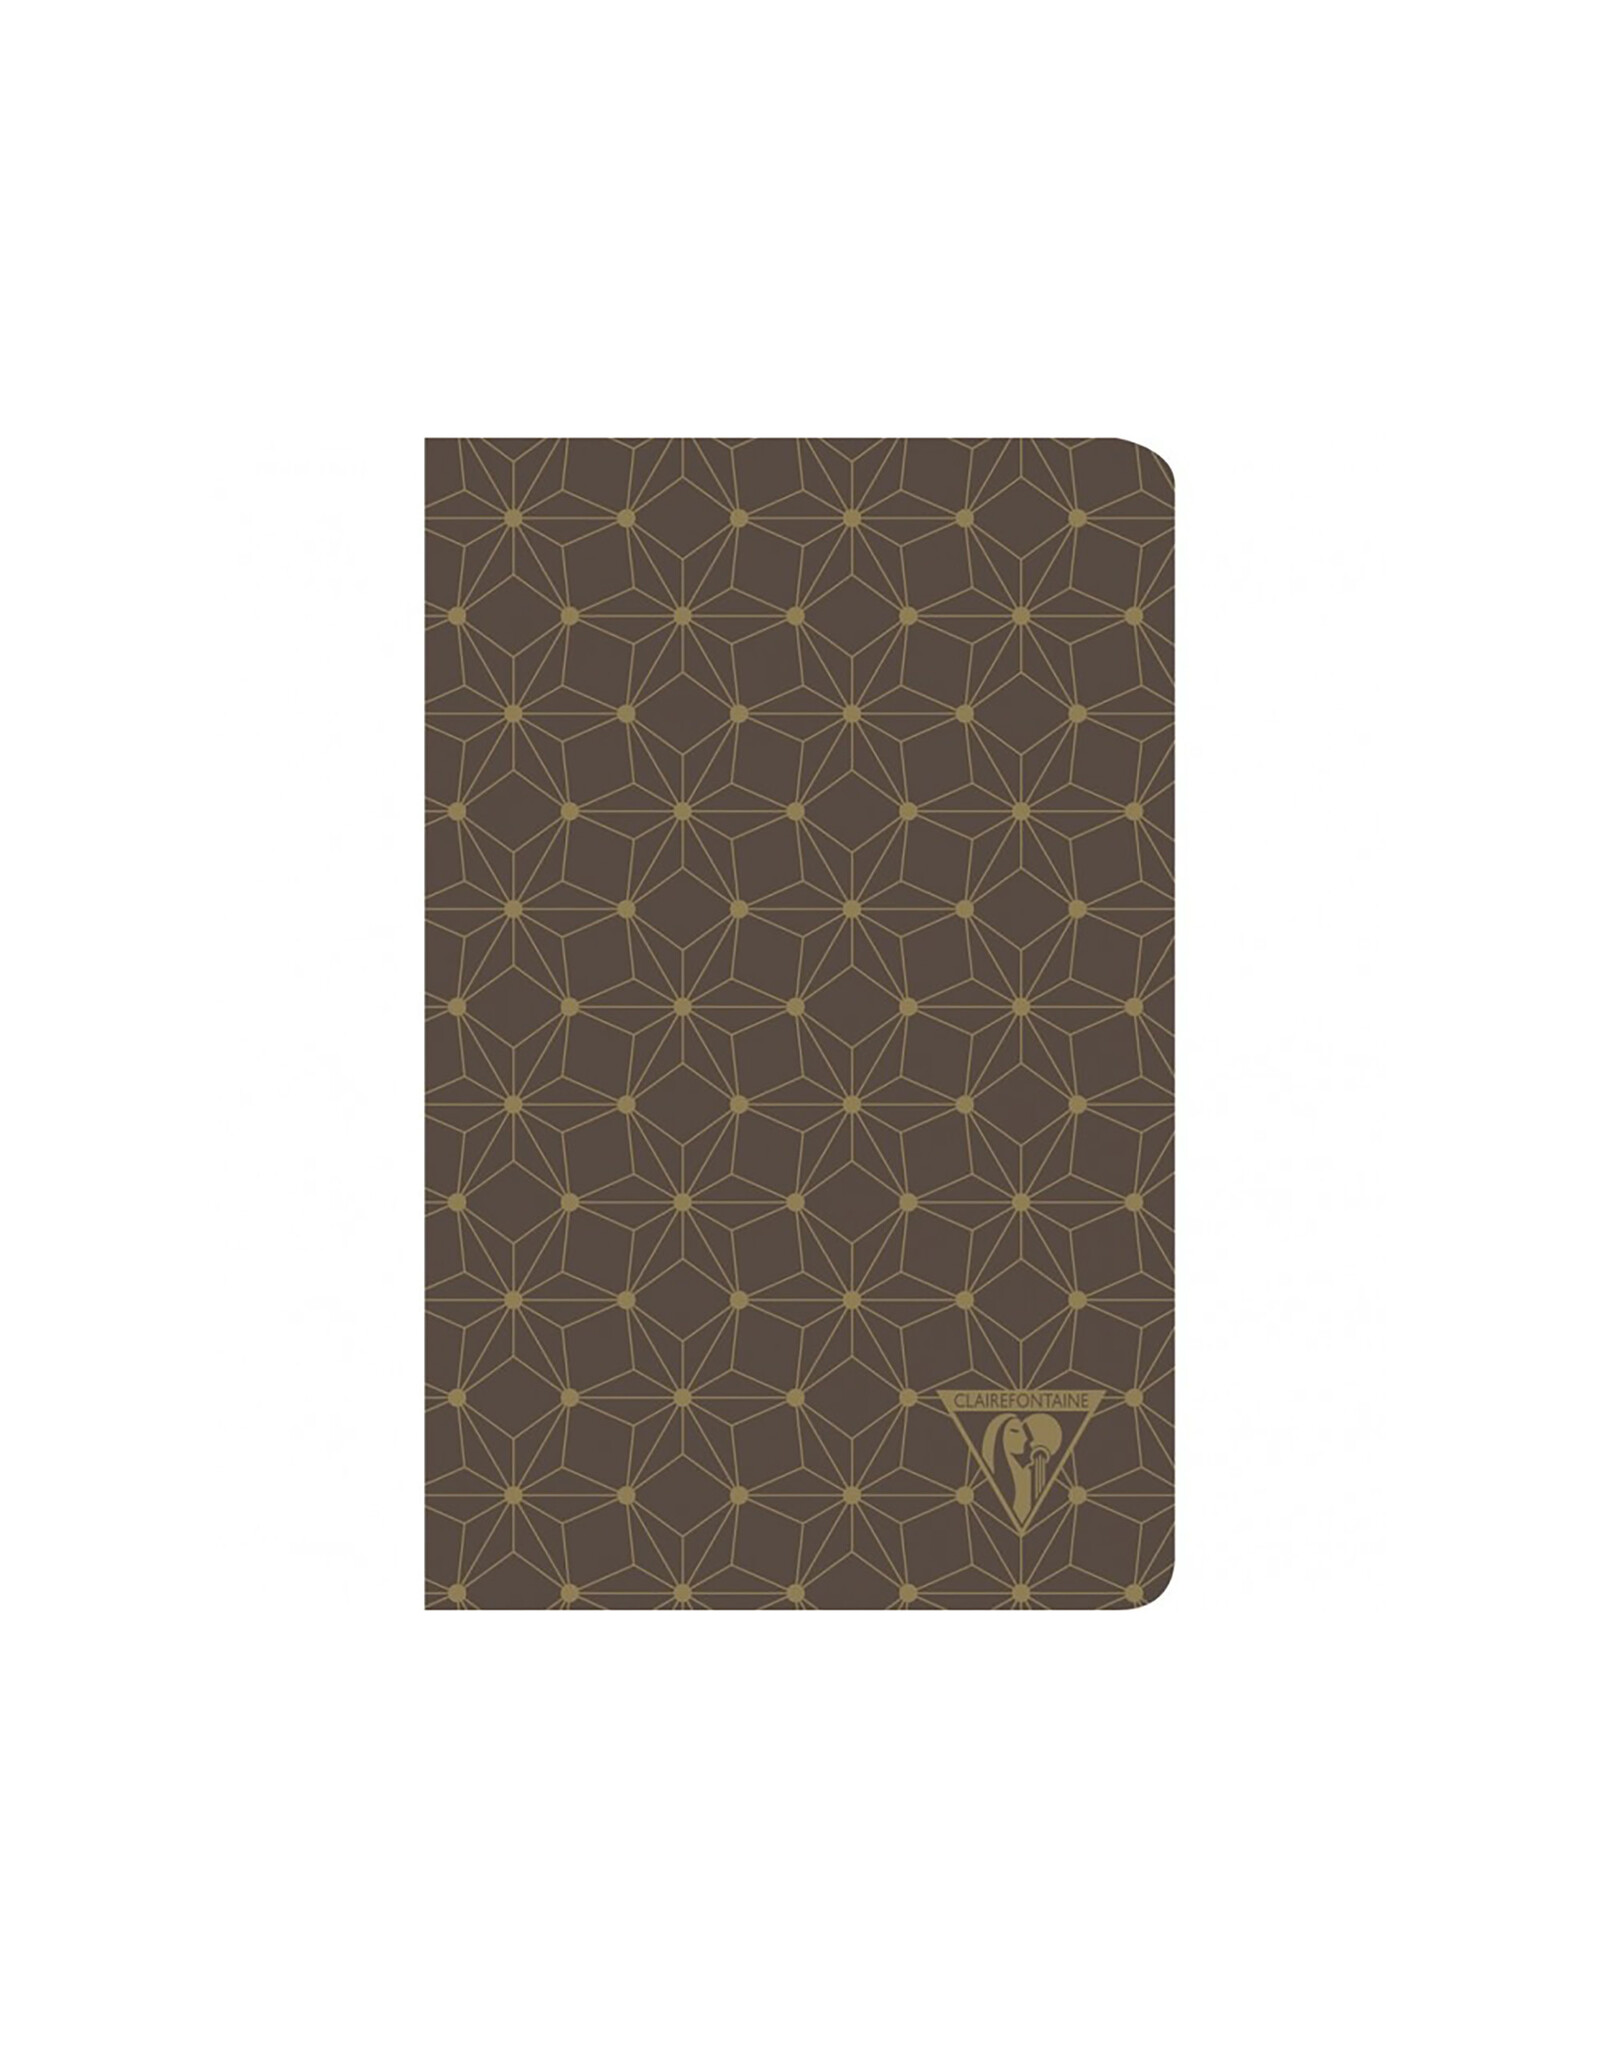 Clairefontaine Constellation Pattern Mahogany Neo Deco Lined A5 Notebook